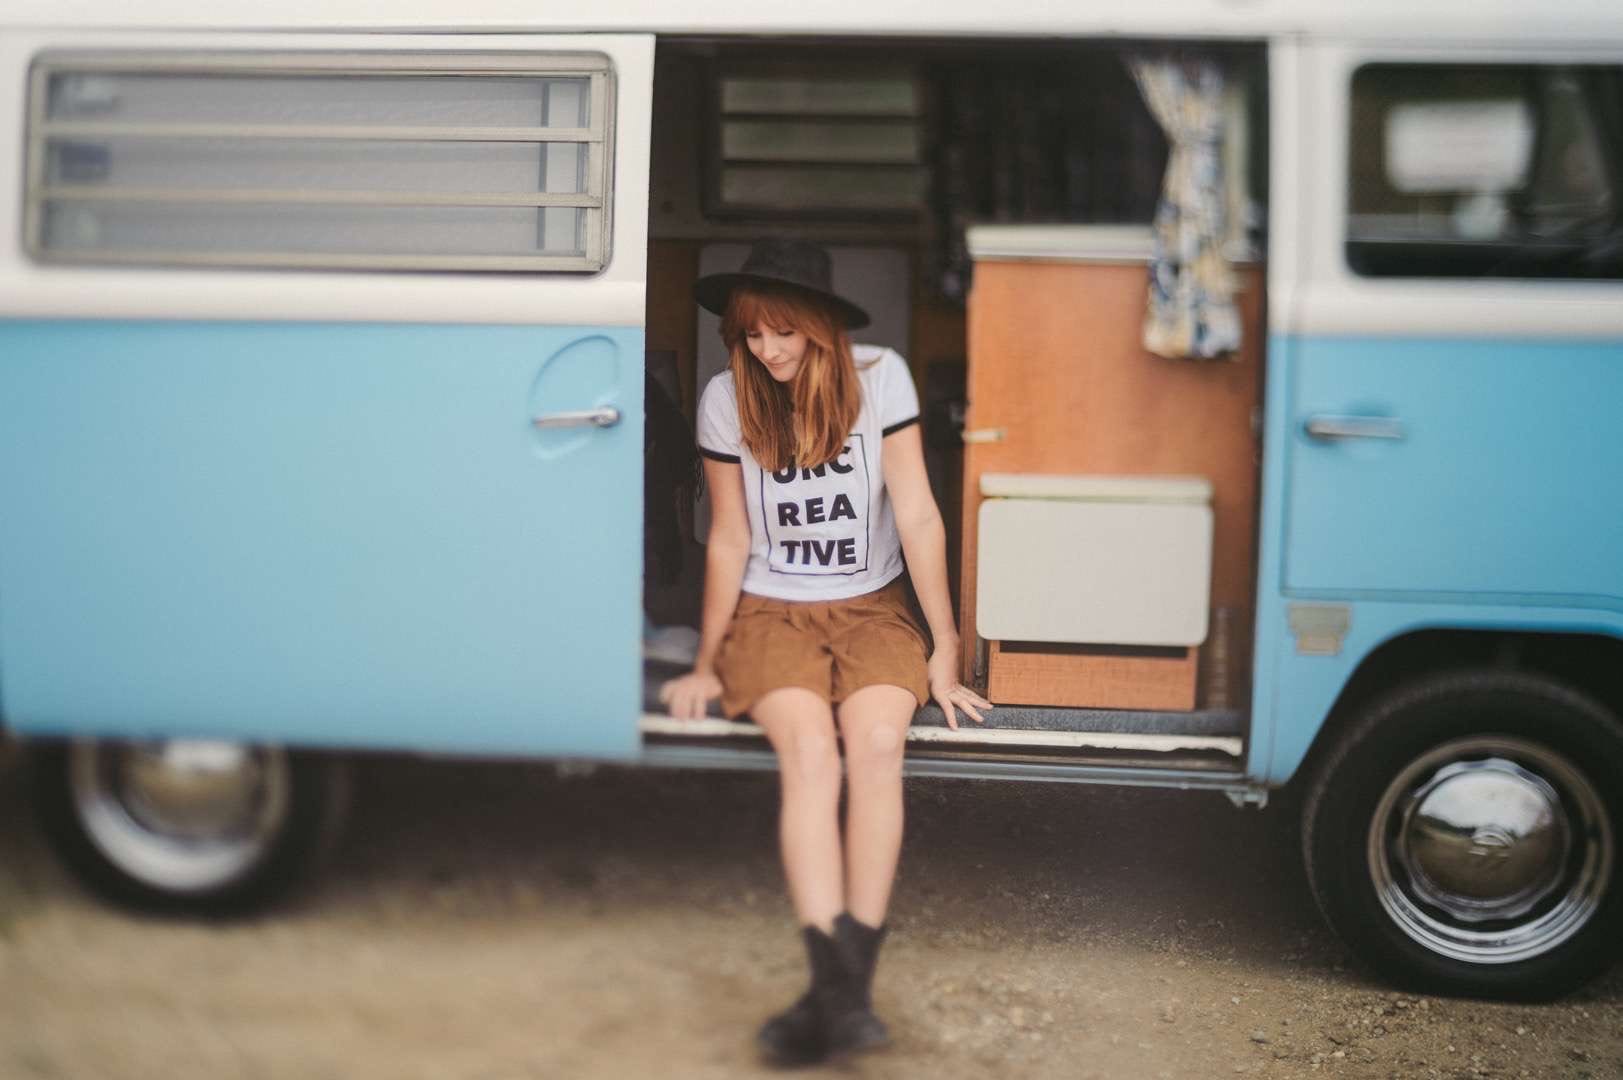 A young woman wearing a white tshirt with Uncreative logo and brown shorts with a black hat looking at the ground. She is sitting in the doorway of a light blue and white RV.